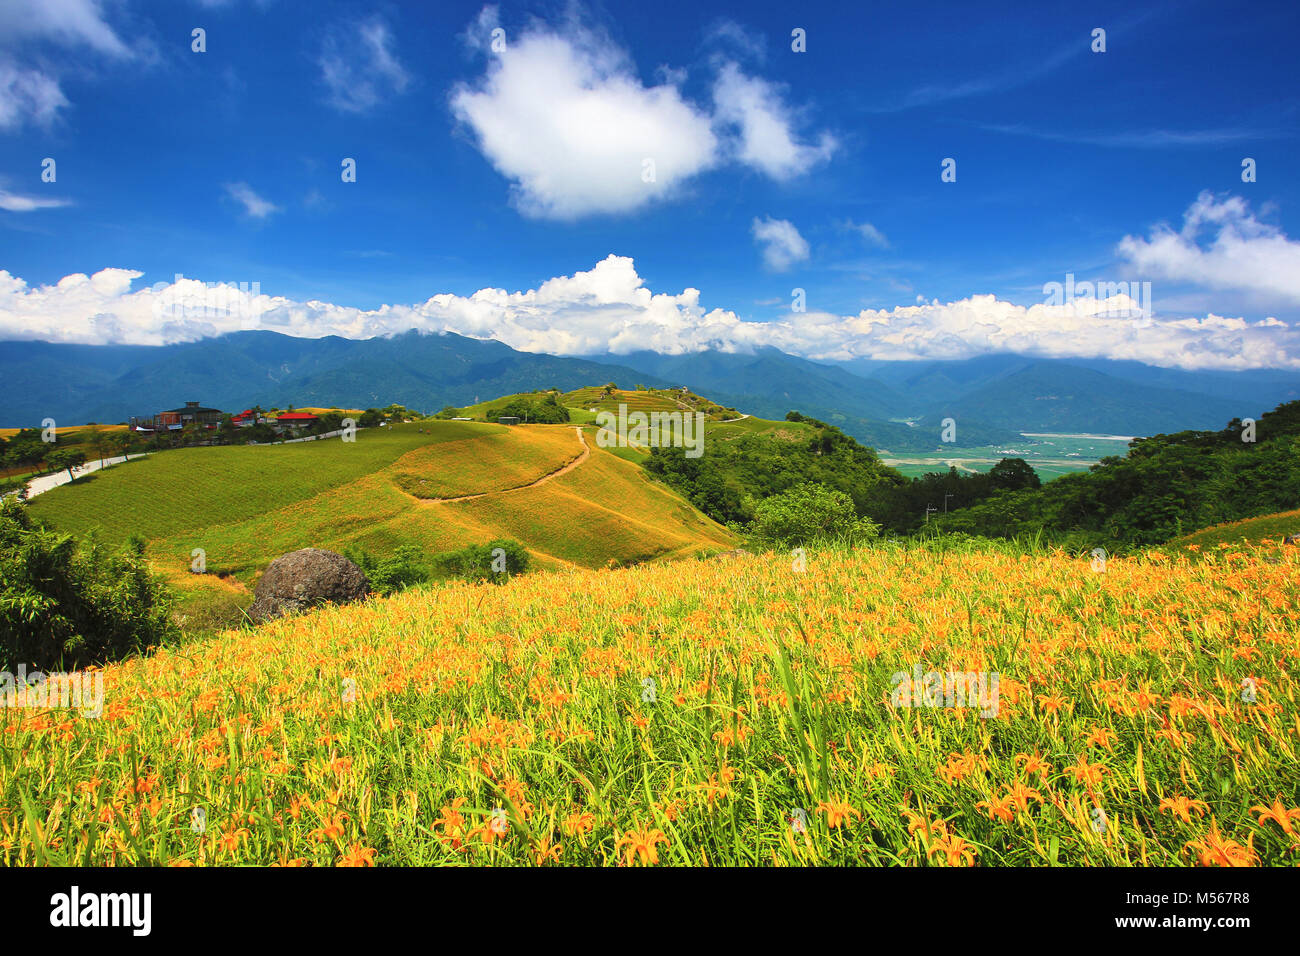 Beautiful scenery of daylily flowers with mountains in a sunny day Stock Photo